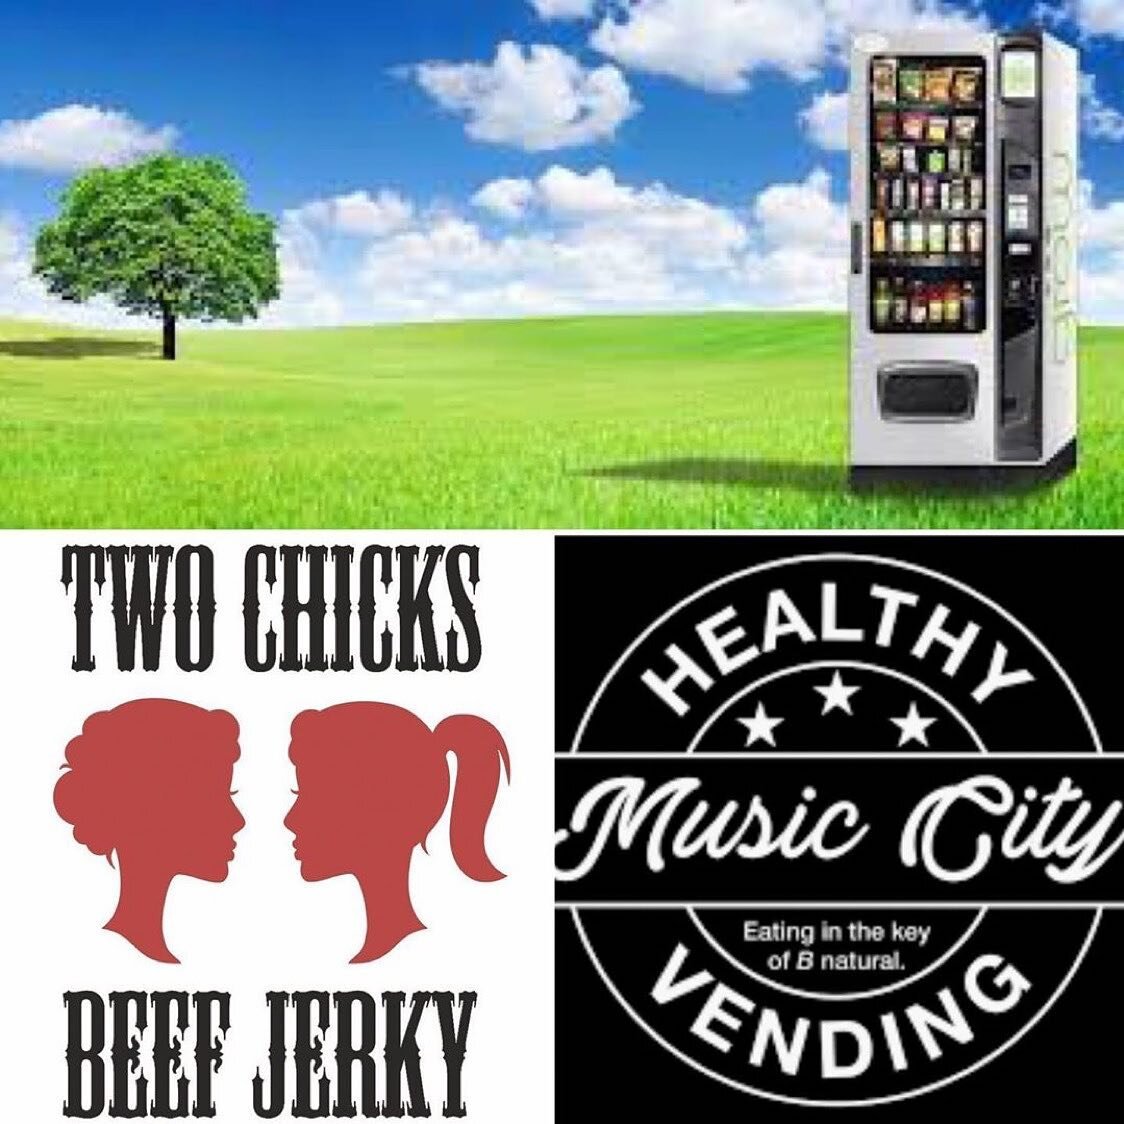 Thank you!! @twochicksjerky for helping Nashville eat in the key of B natural.  Repost @twochicksjerky  We all know Nashville is known for its amazing music- but now you can also get amazing jerky there! Two Chicks Jerky is now proudly carried by Mus